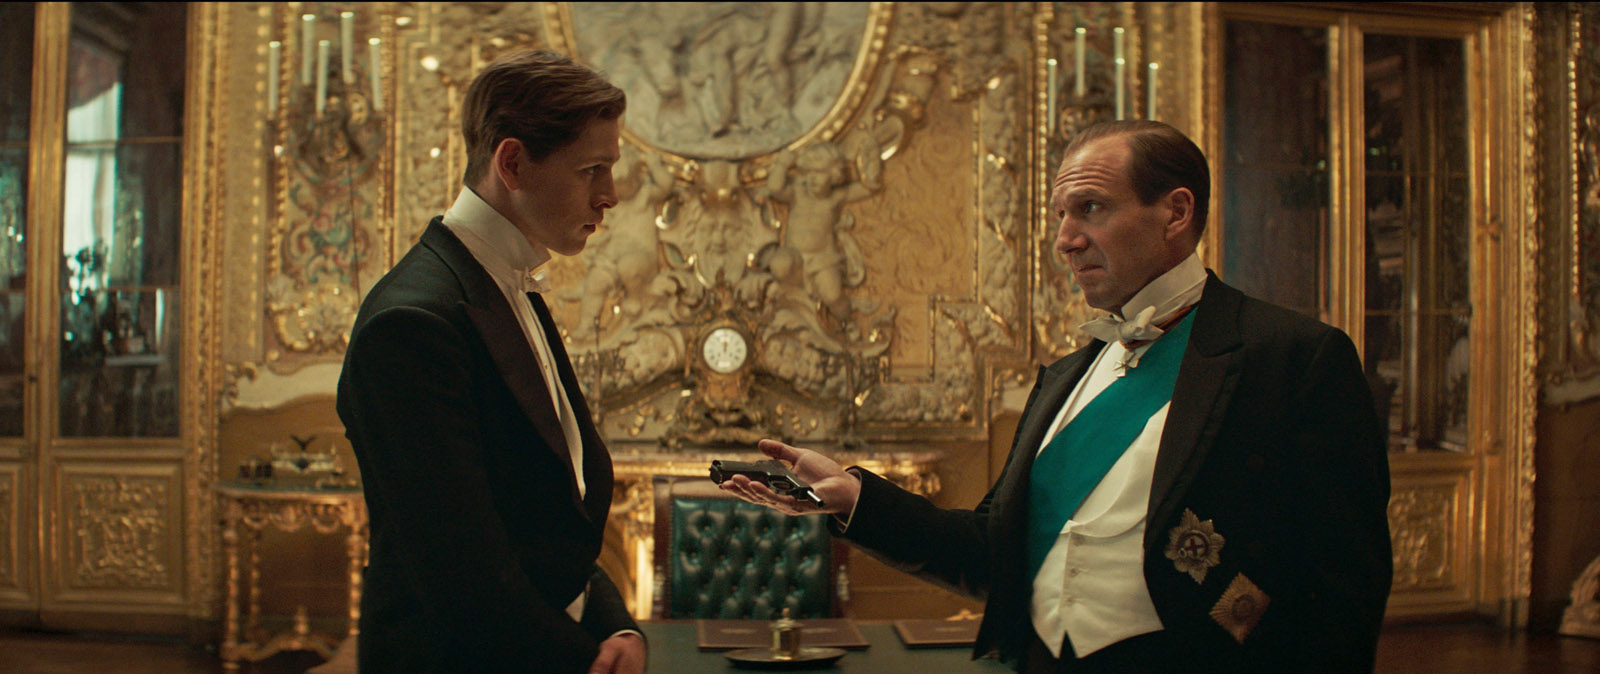 (L-R) Harris Dickinson as Conrad and Ralph Fiennes as Oxford in 20th Century Studios' THE KING'S MAN. Photo Credit: Courtesy of 20th Century Studios. © 2020 Twentieth Century Fox Film Corporation. All Rights Reserved.